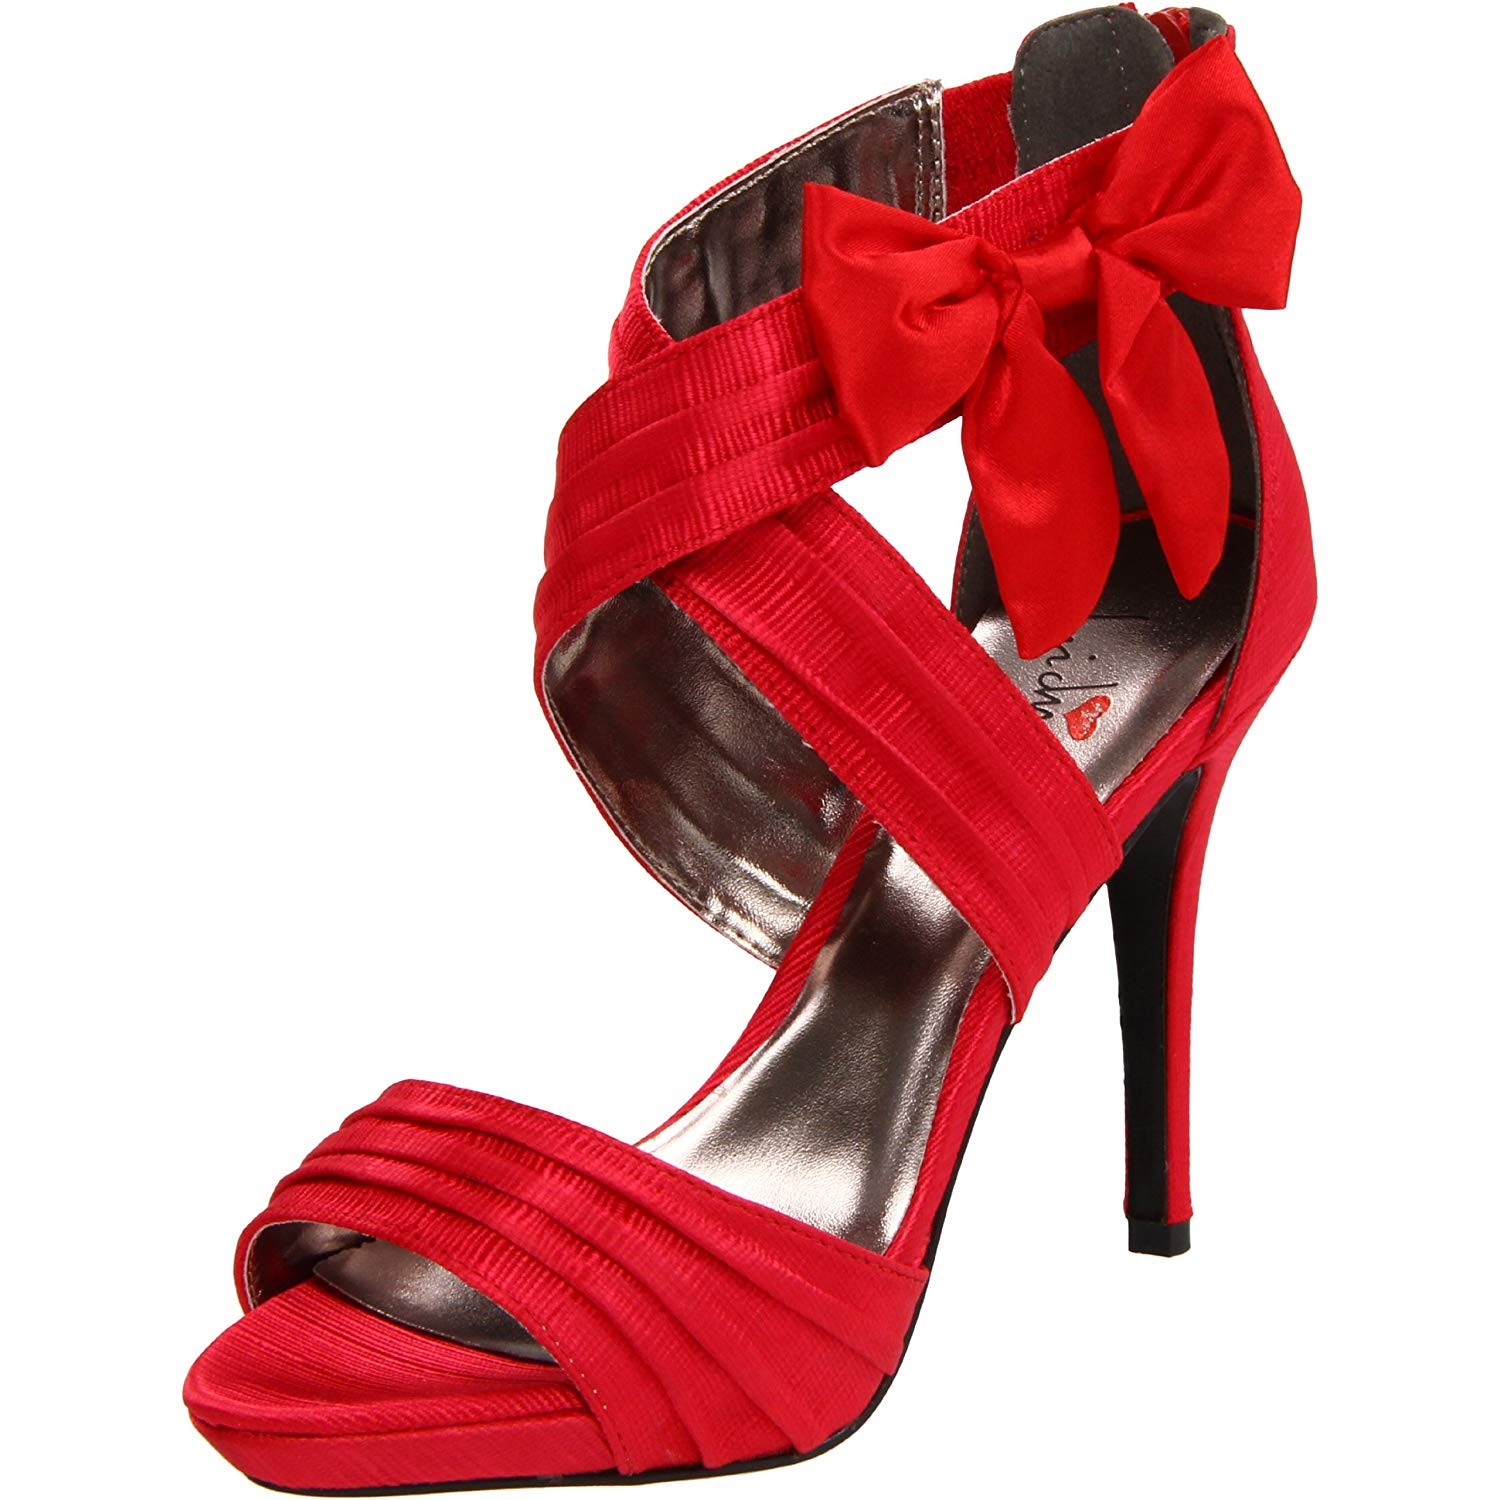 Red Shoes For Wedding
 Red Wedding Shoes Lots of Wedding Ideas